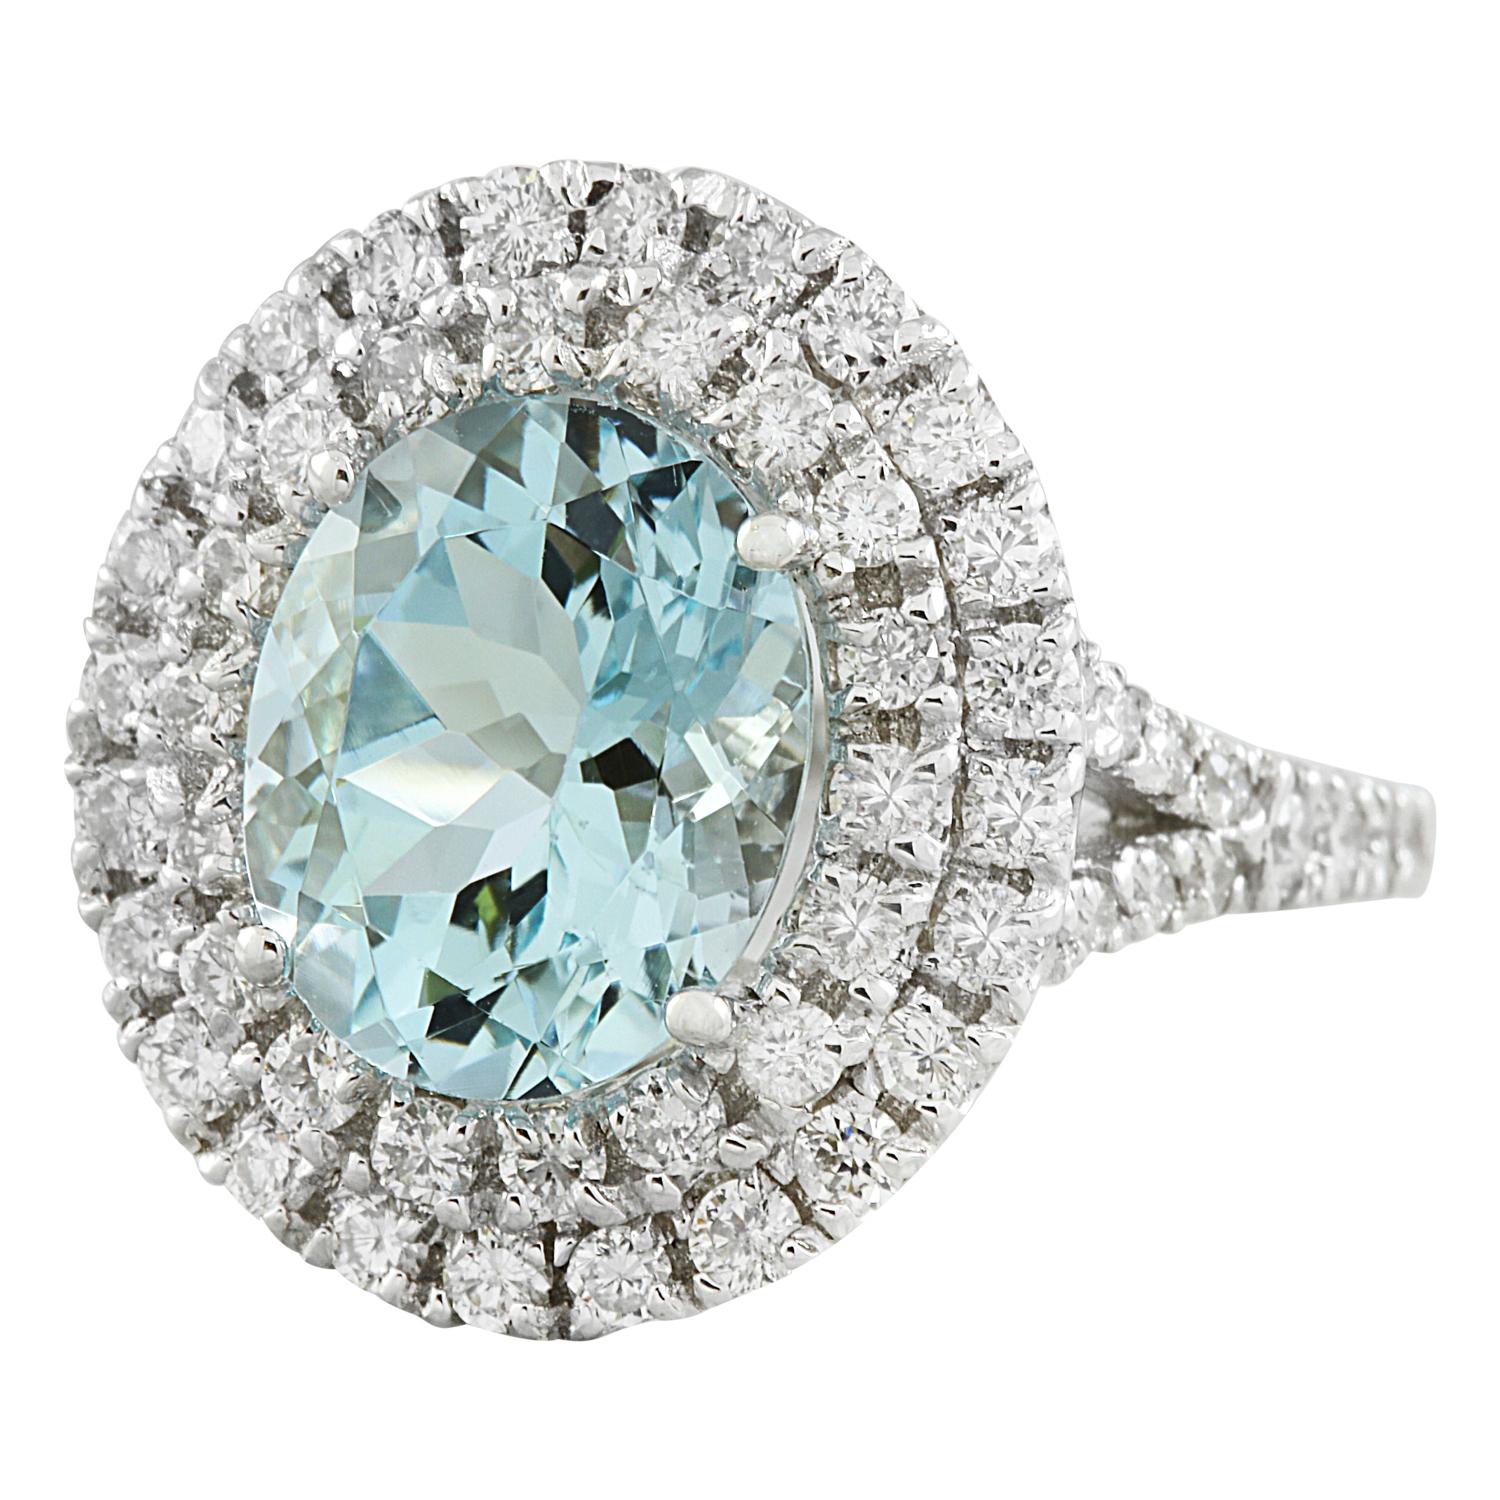 Introducing our magnificent 14K Solid White Gold Diamond Ring, adorned with a breathtaking 5.35 Carat Natural Aquamarine. Stamped with authenticity, this ring is a testament to superior craftsmanship and timeless beauty. Weighing 6.1 grams in total,